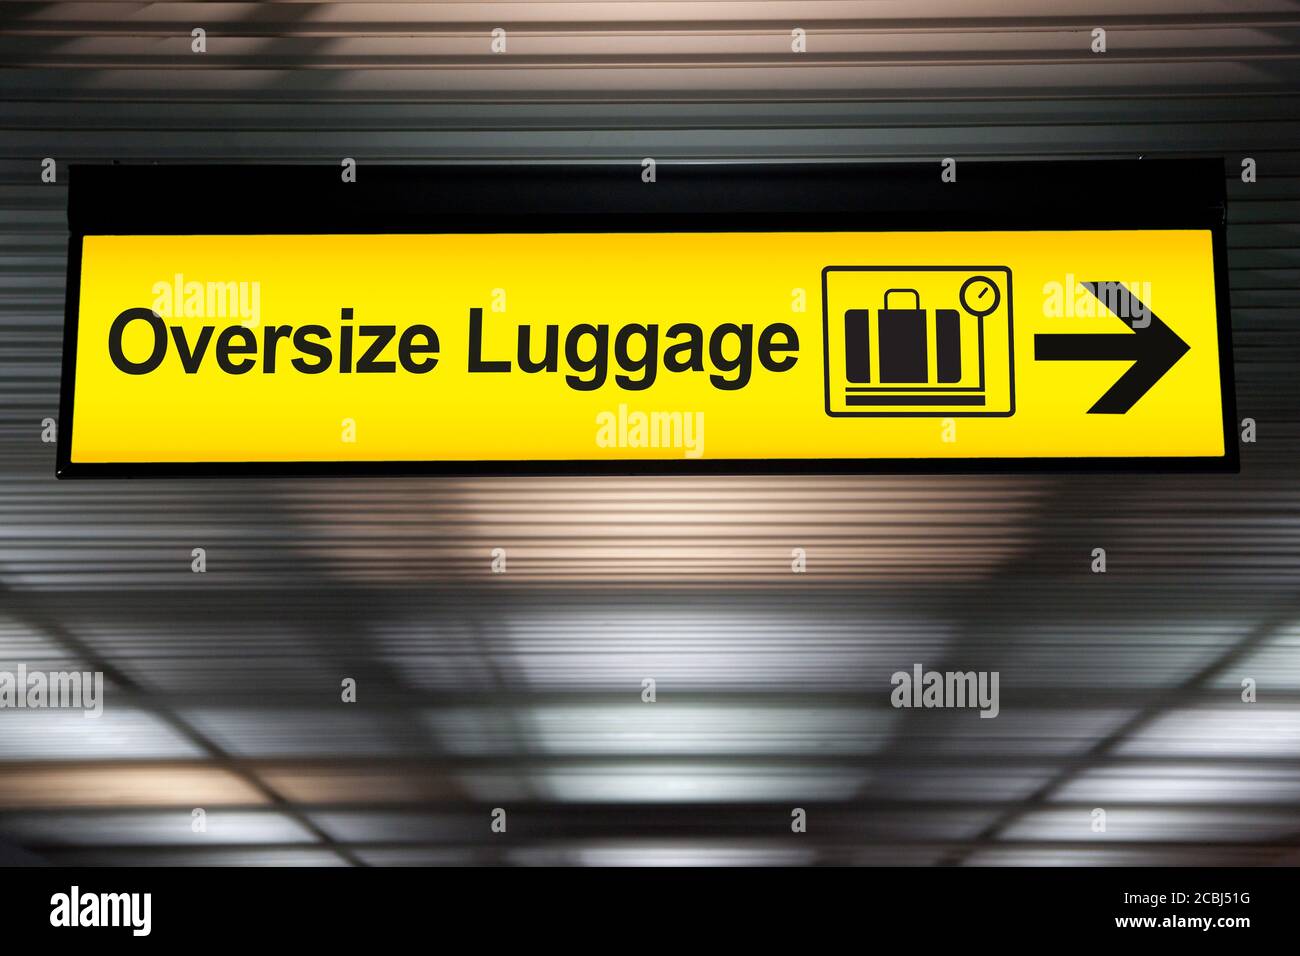 oversize luggage yellow sign with arrow direction hang from ceiling at the airport Stock Photo